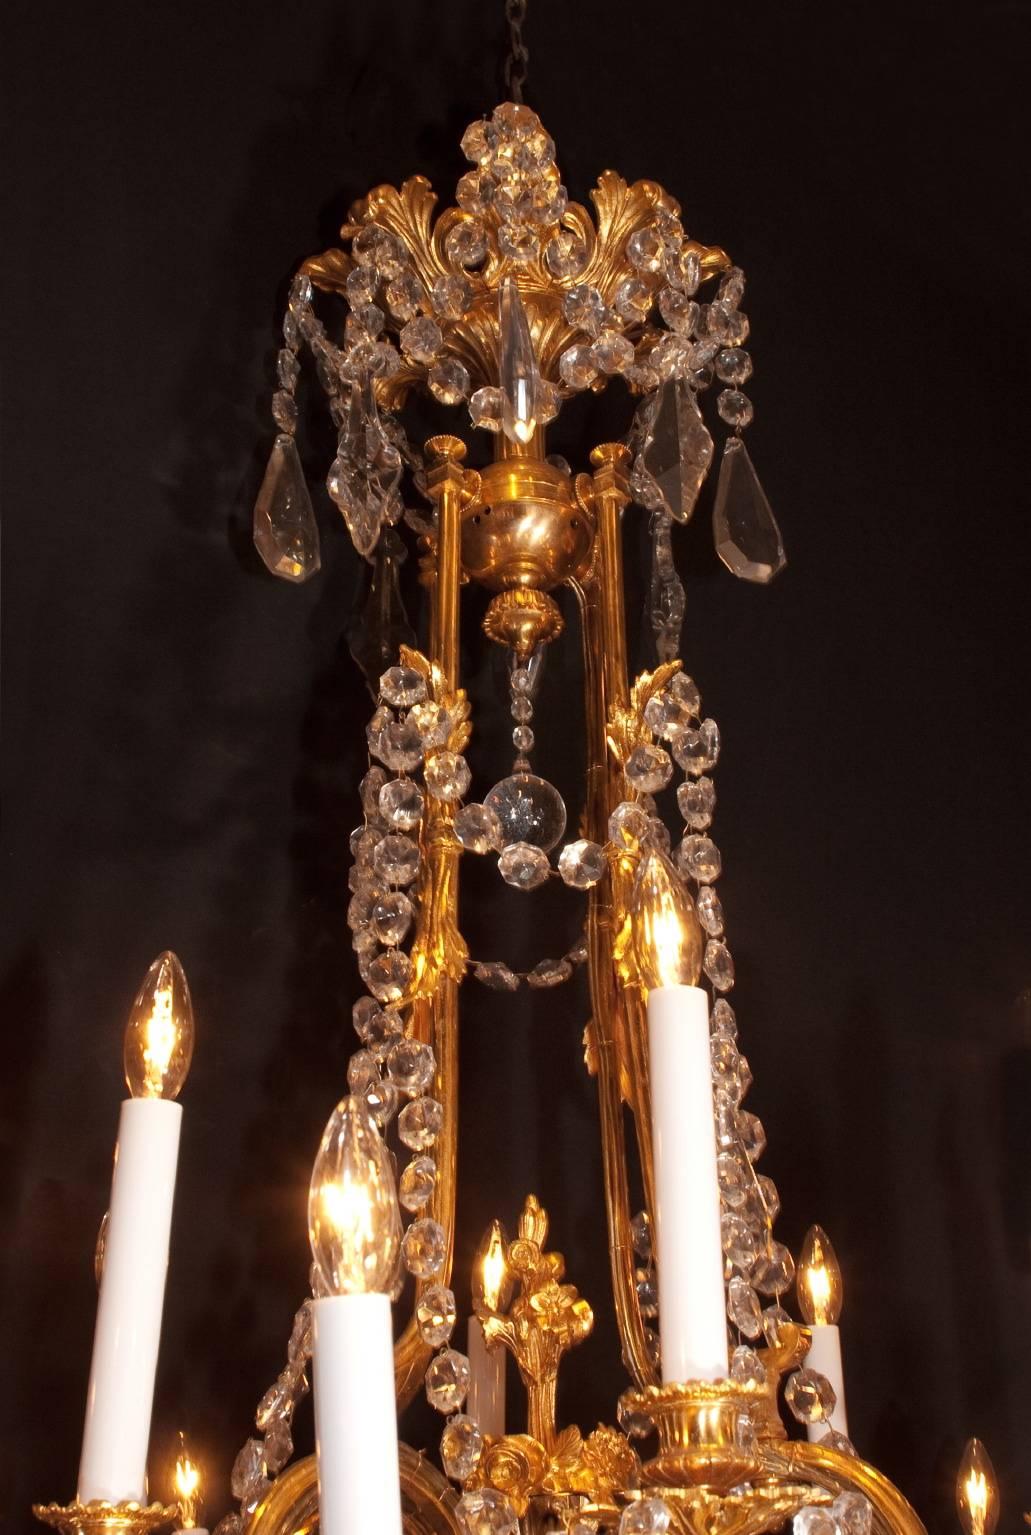 This antique chandelier is made of gold covered bronze, and features 2 staggered tiers of lighting, with each light resting atop a highly decorated bobeche. The lights are mostly grouped in sets of fours, with three lights in the lower tier resting